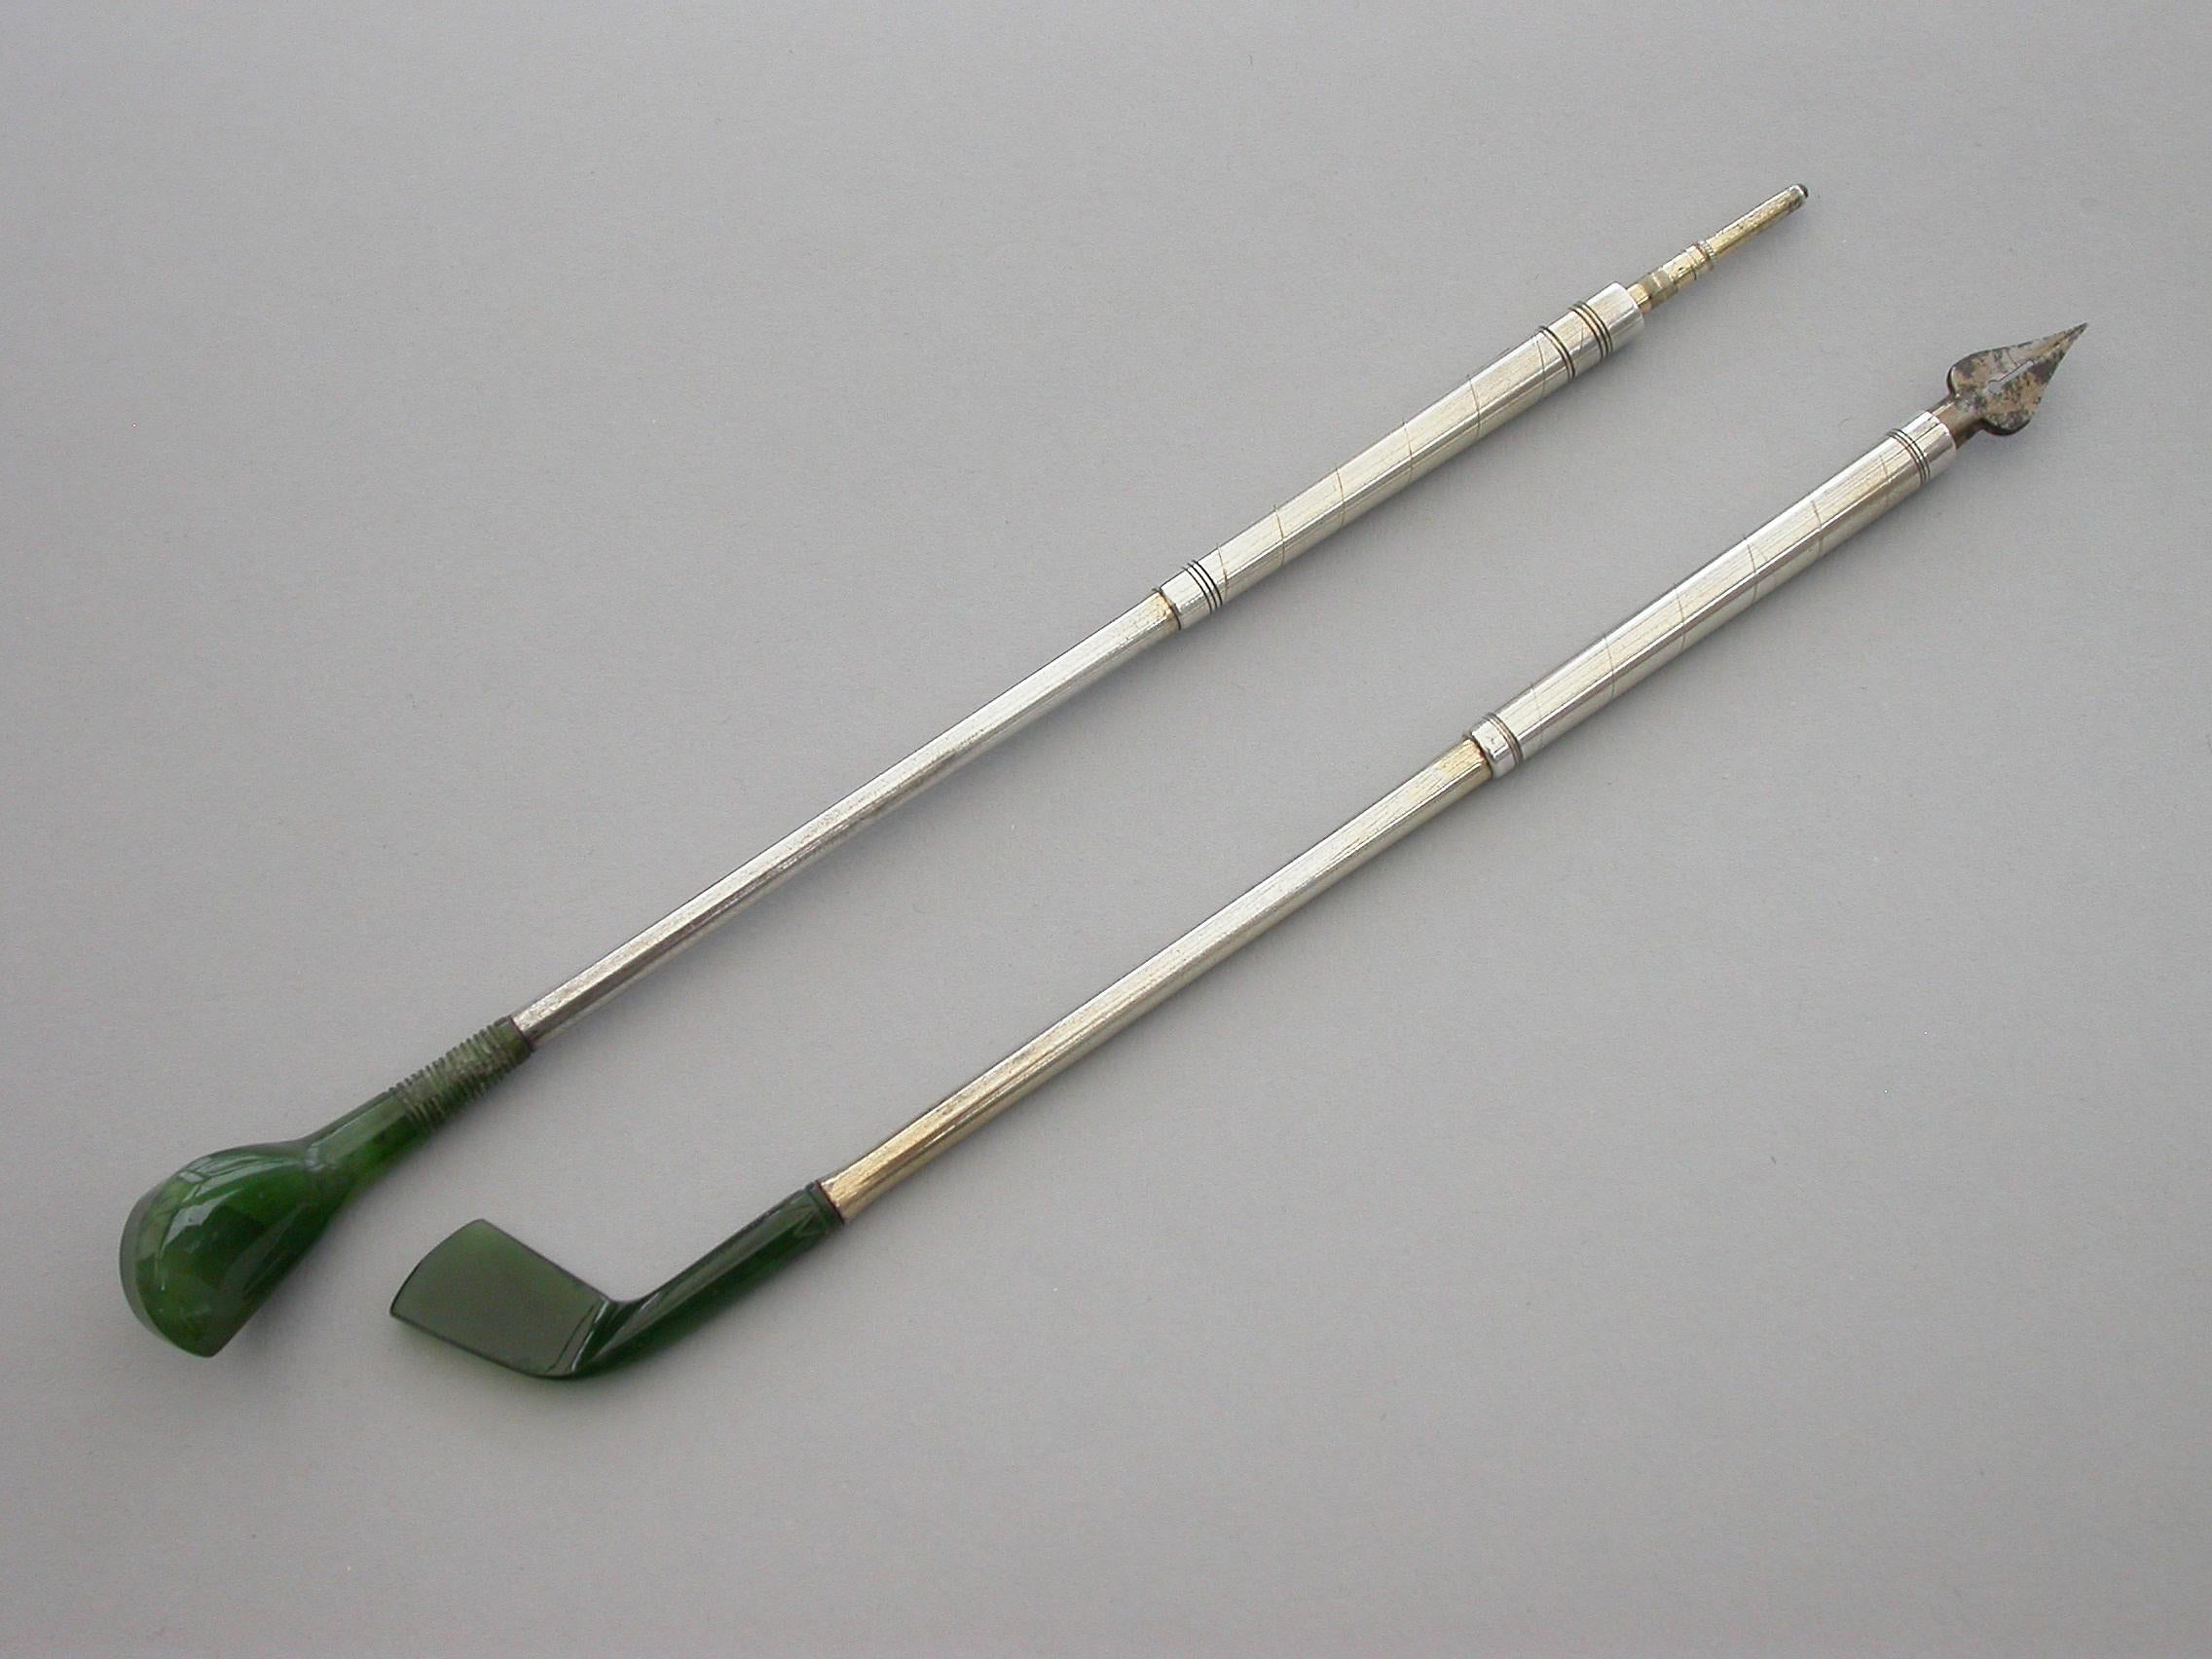 A good quality late Victorian or early 20th century pair of novelty silver mounted nephrite propelling pencil and dip pen, made in the form of Golf Clubs (a driver and a long iron). Realistically modeled and carved, the propelling pencil extending